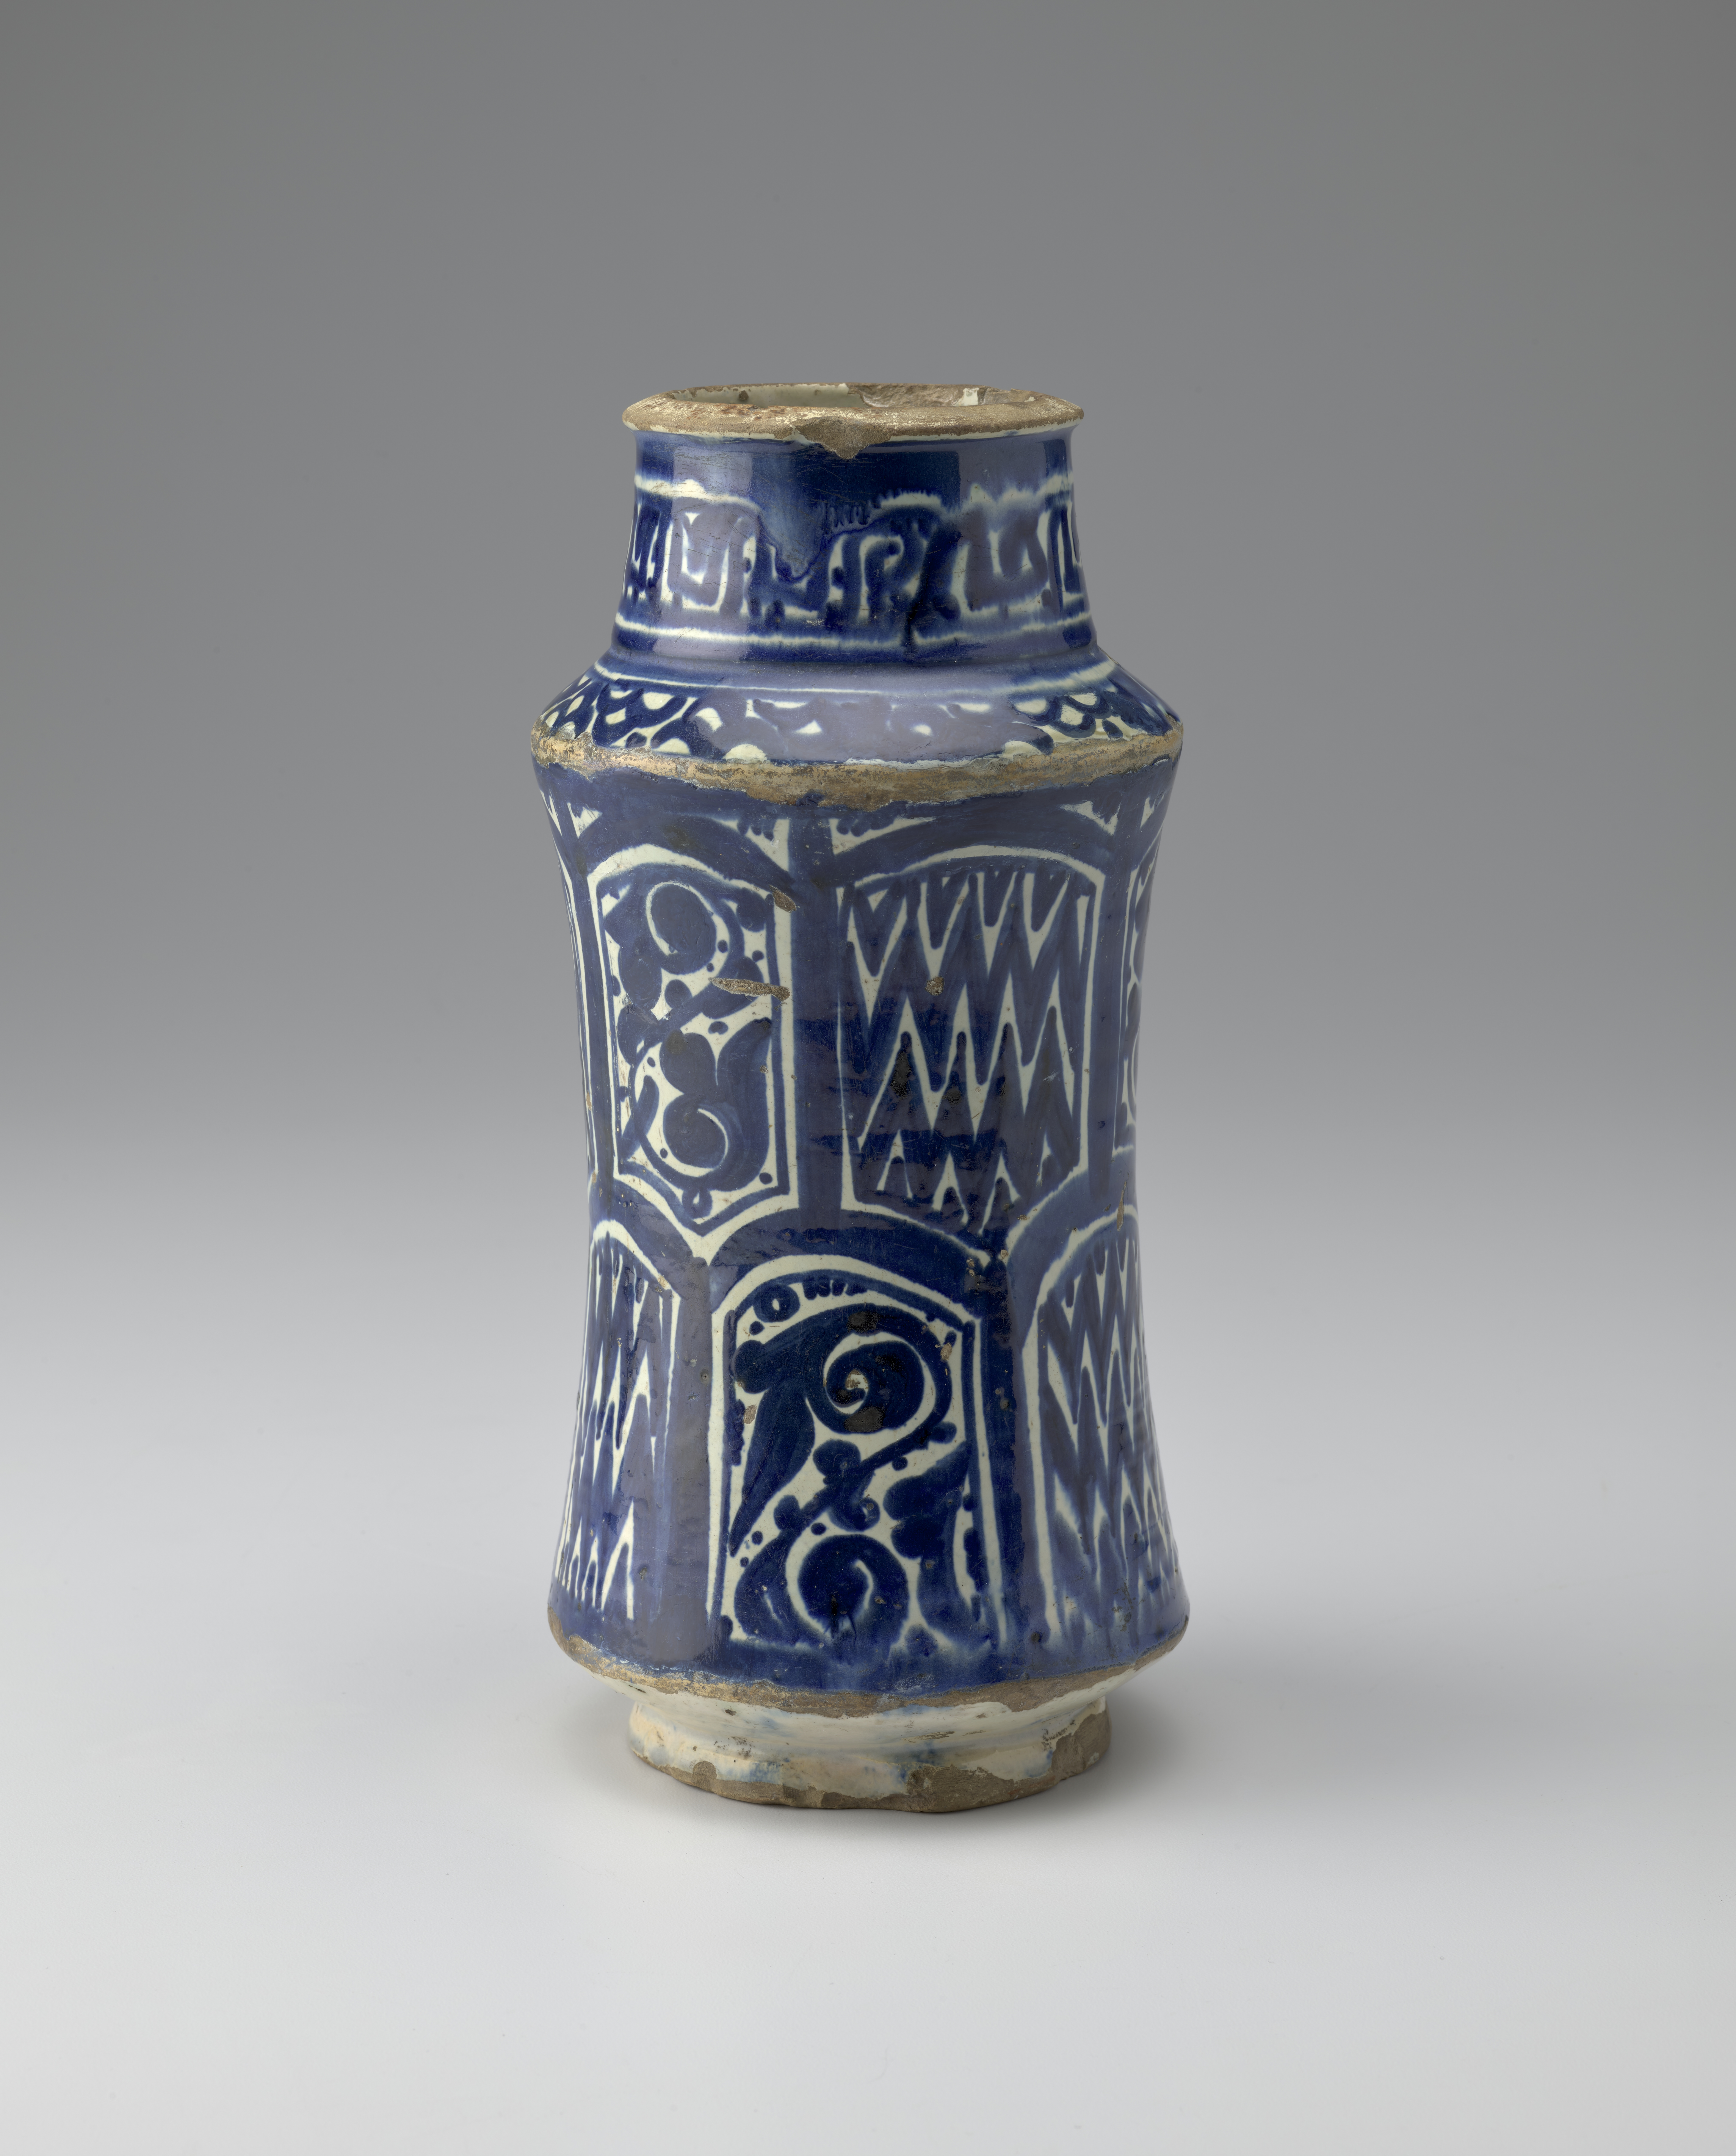 A blue and white pottery jar decorated with chevron and floral patterns.